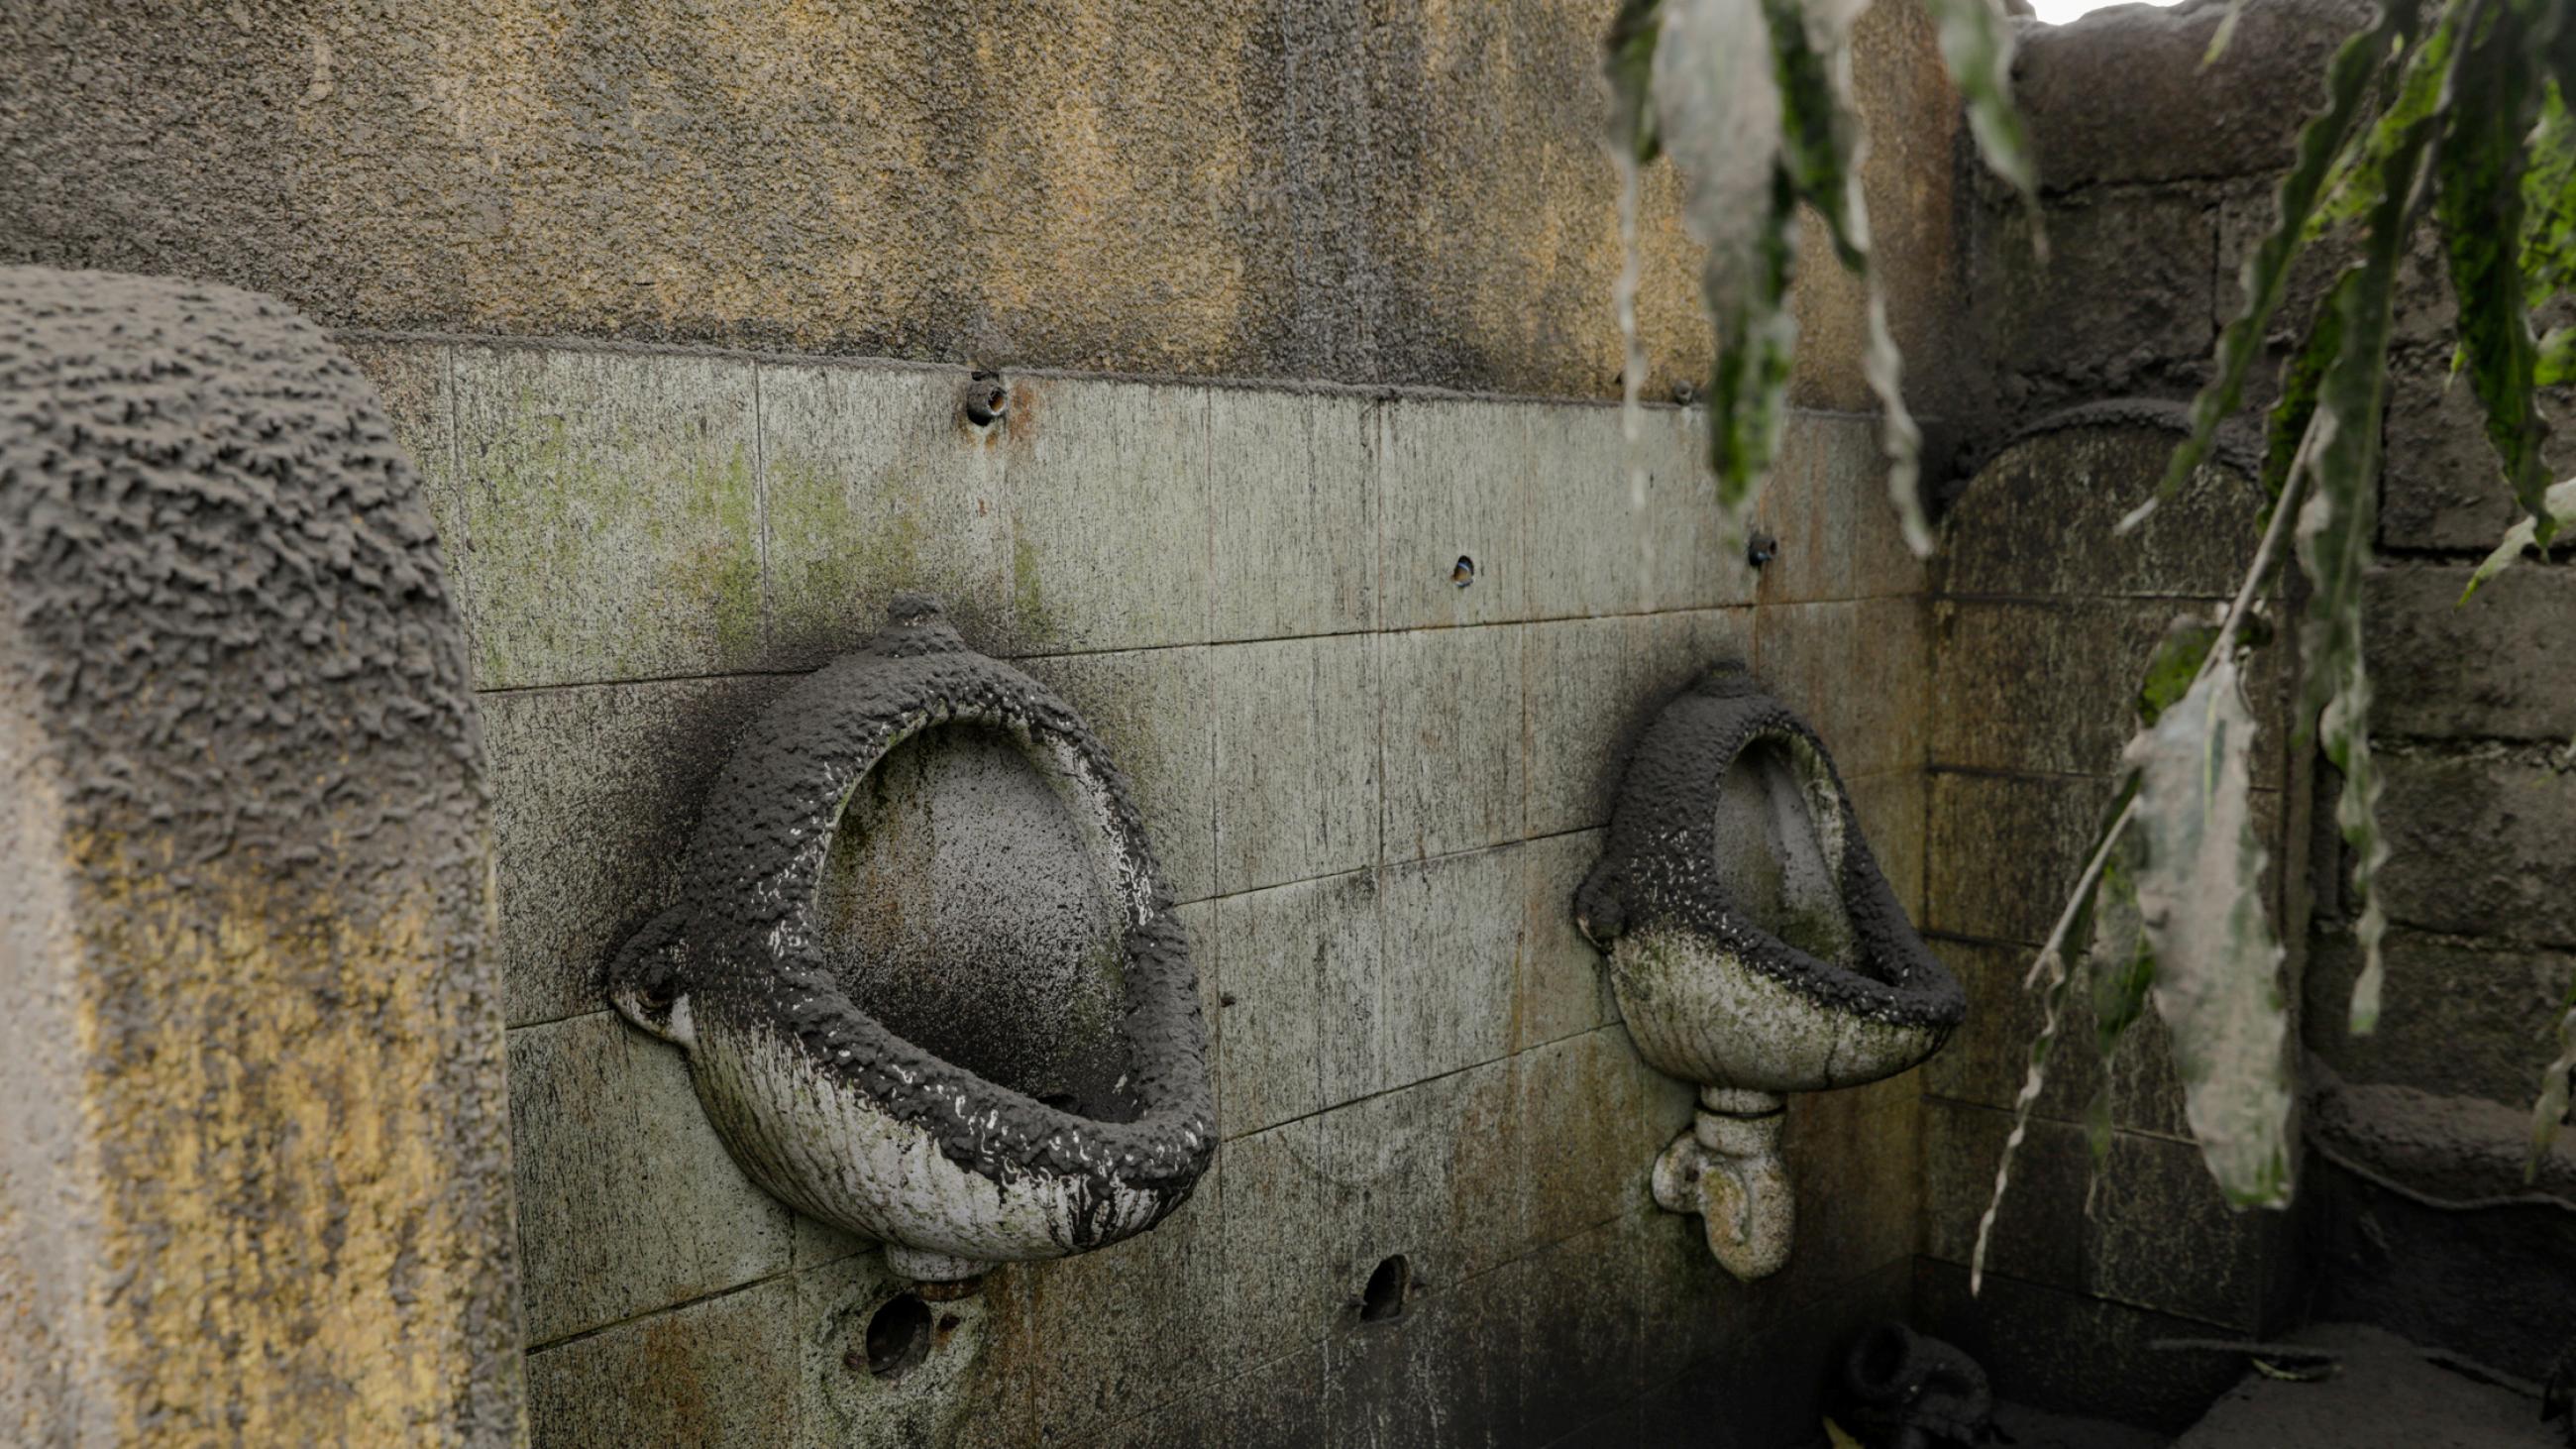 Urinals are filled with volcanic ash in a closed park in Tagaytay City, Philippines, January 14, 2020.